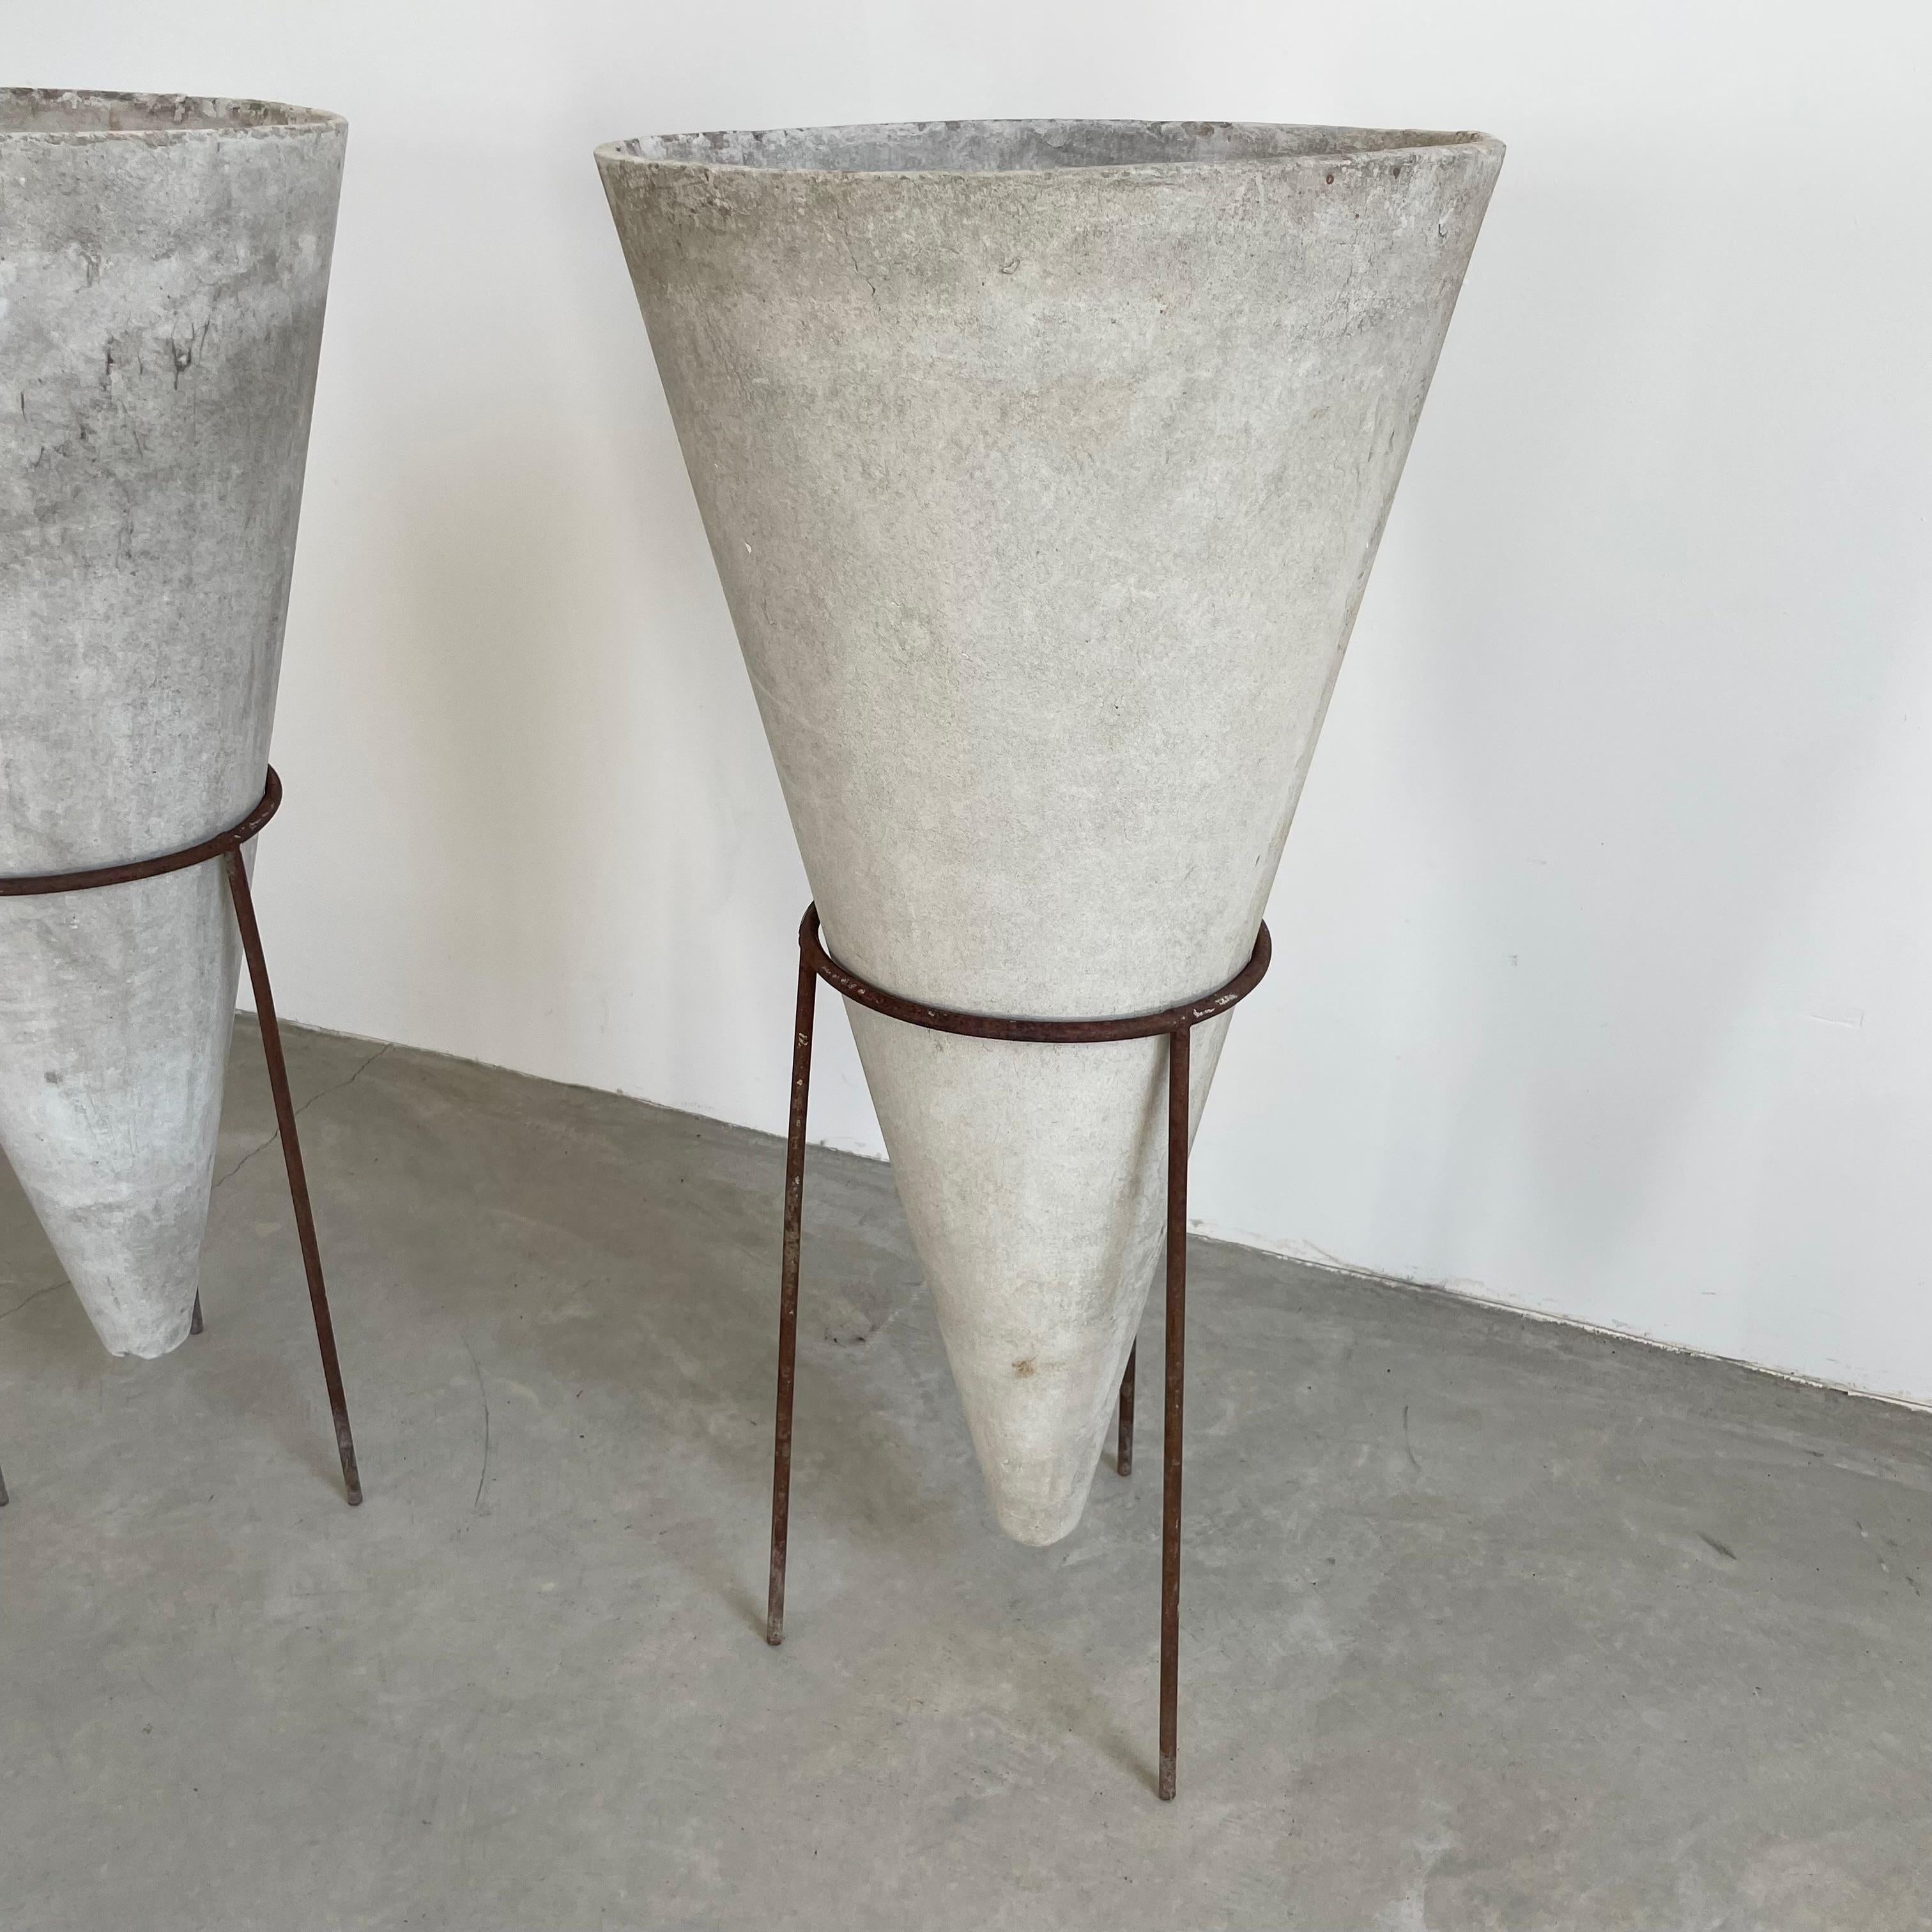 Willy Guhl Concrete Cone Planter on Iron Stand, 1960s 5